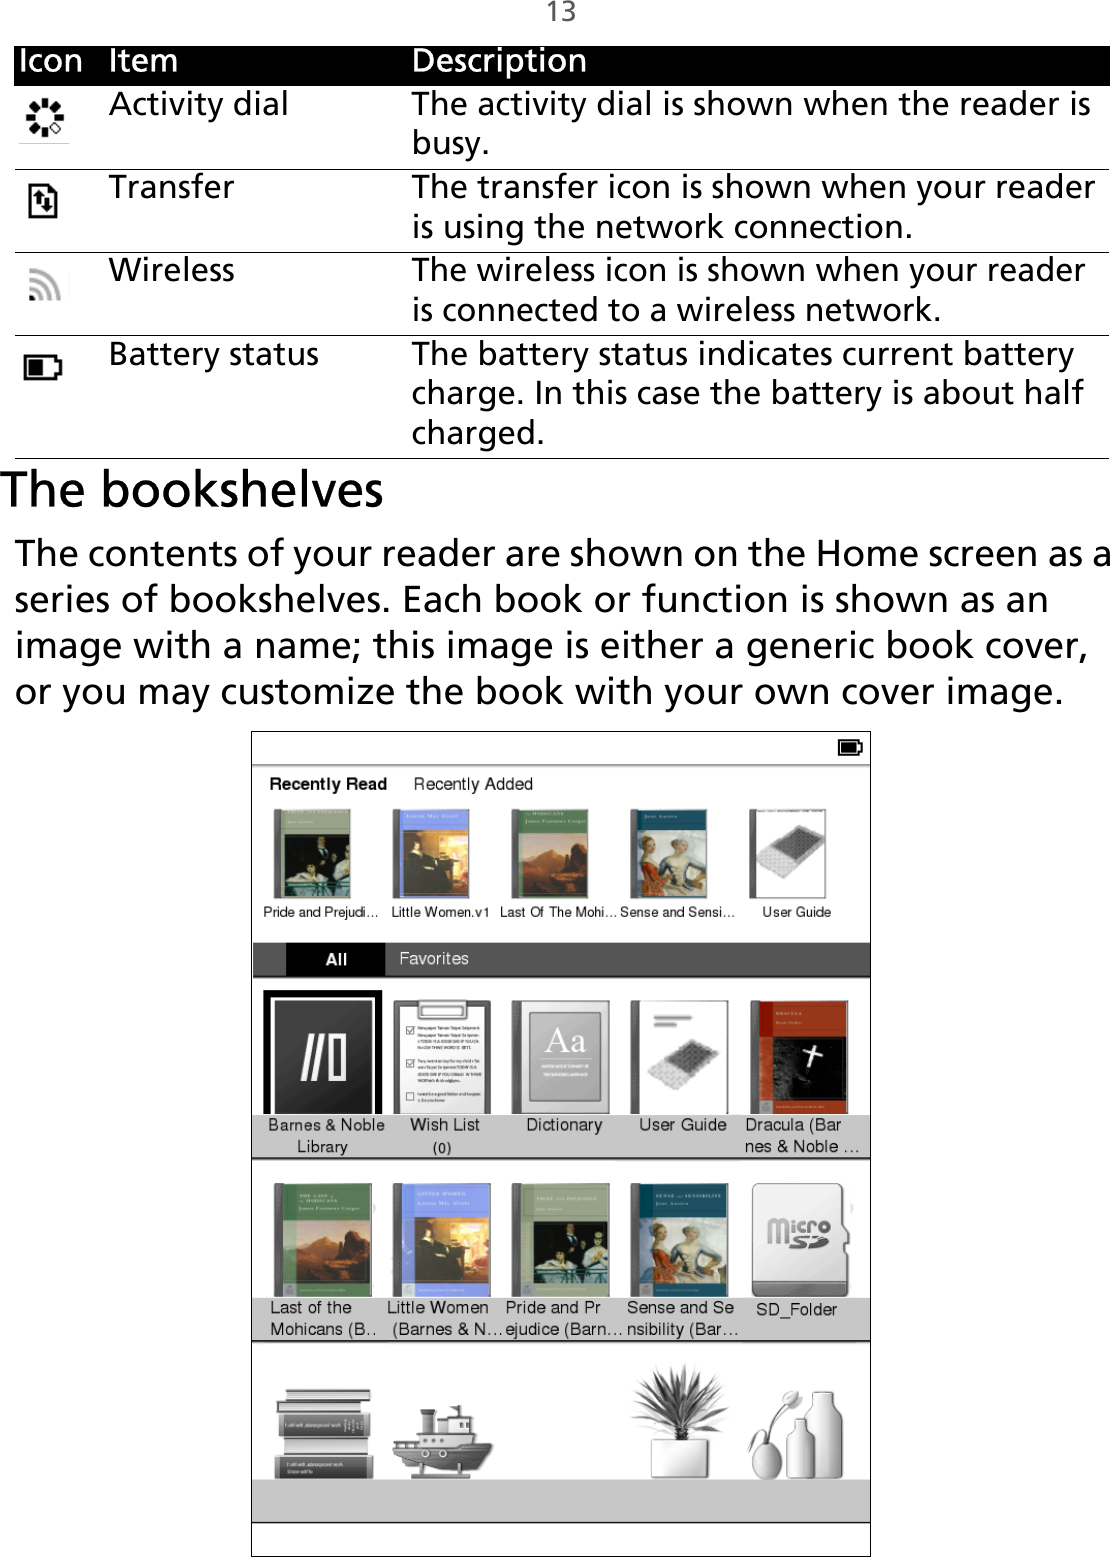 13The bookshelvesThe contents of your reader are shown on the Home screen as a series of bookshelves. Each book or function is shown as an image with a name; this image is either a generic book cover, or you may customize the book with your own cover image.Icon Item DescriptionActivity dial The activity dial is shown when the reader is busy.Transfer The transfer icon is shown when your reader is using the network connection.WirelessThe wireless icon is shown when your reader is connected to a wireless network.Battery status The battery status indicates current battery charge. In this case the battery is about half charged.